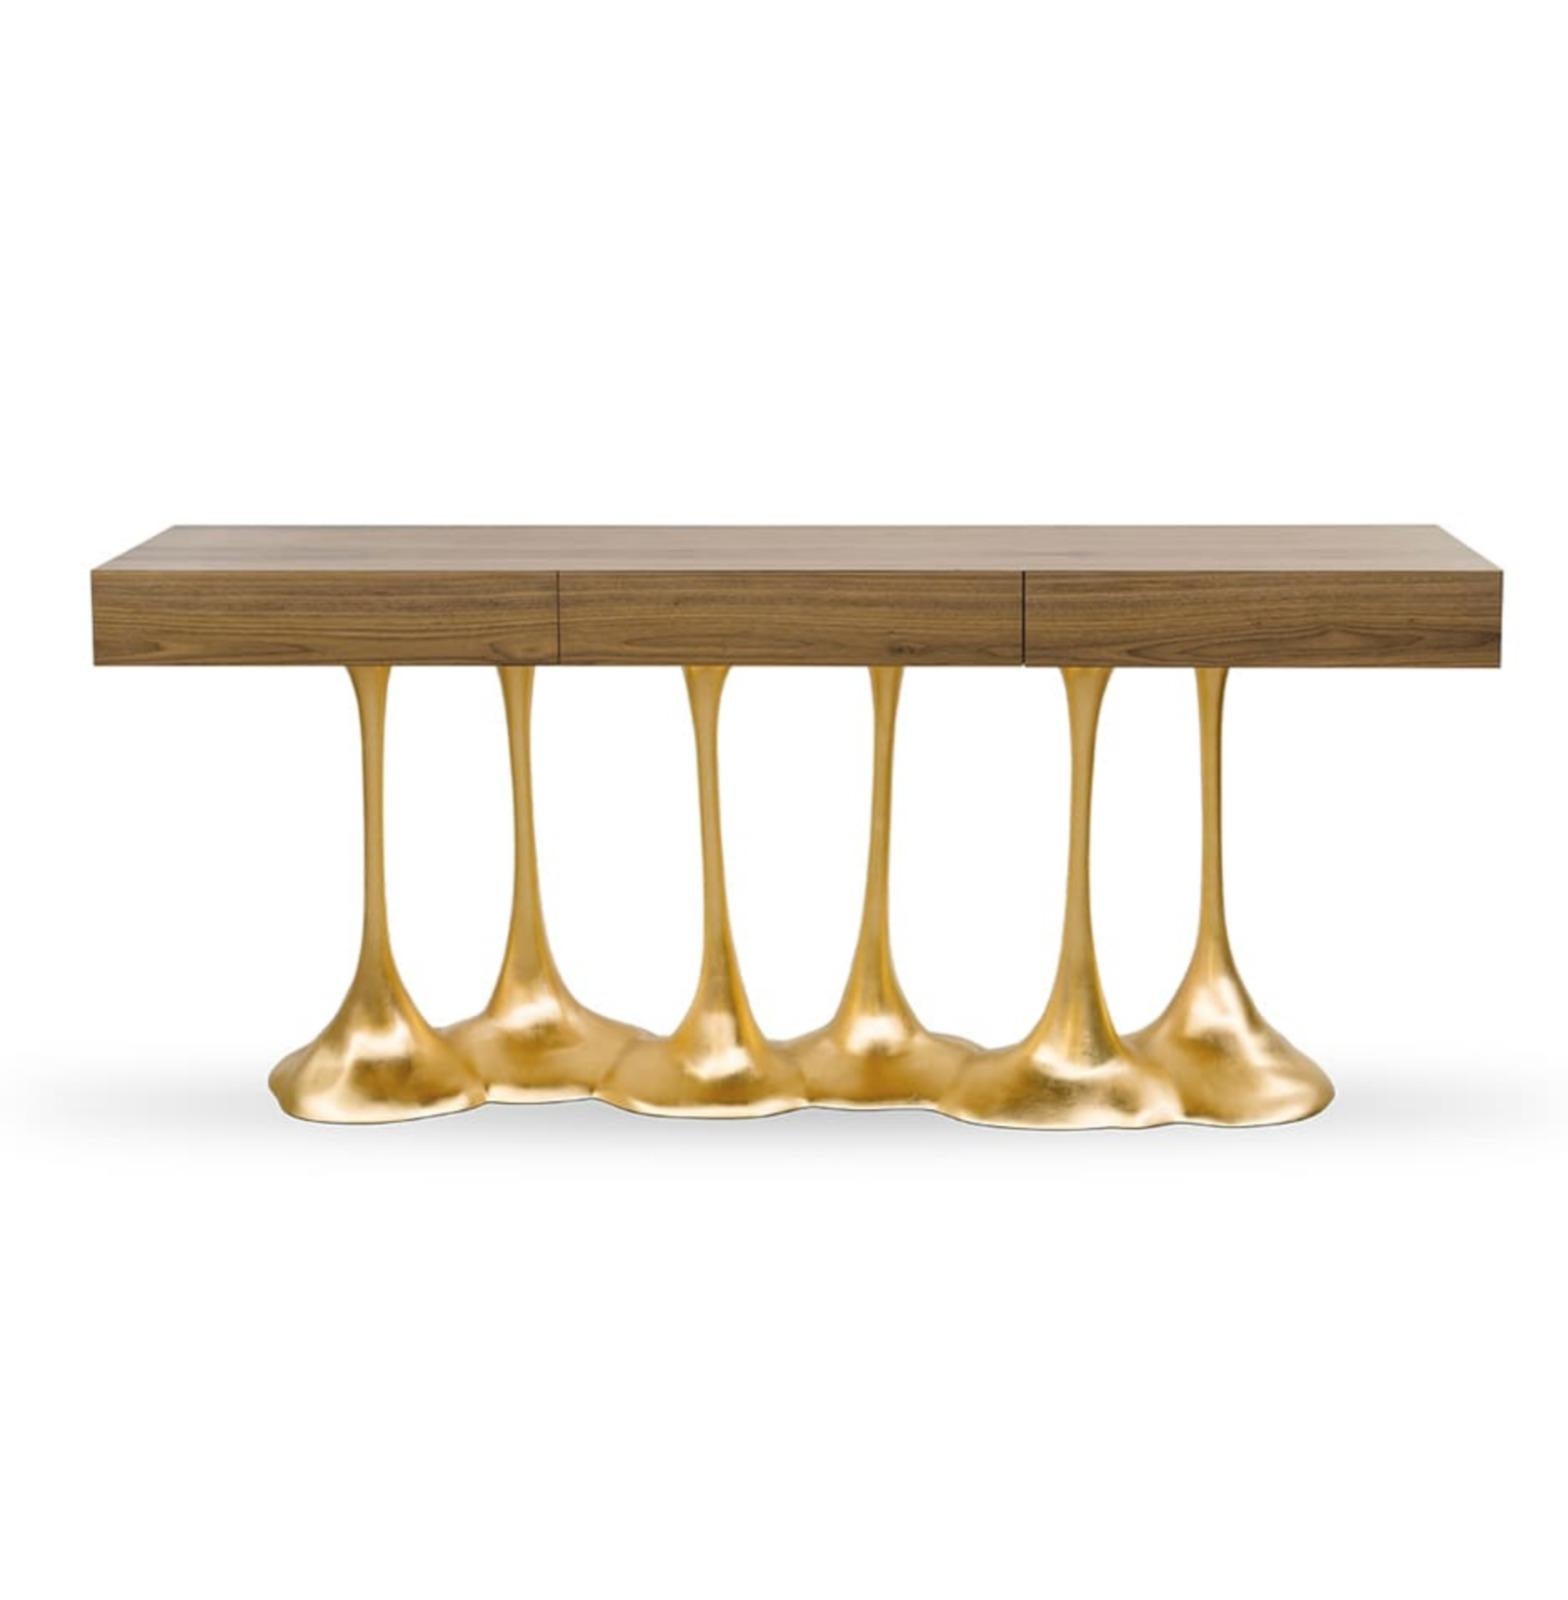 Hand-Crafted New Design Console in Wood finished in Marron Wood High Gloss For Sale